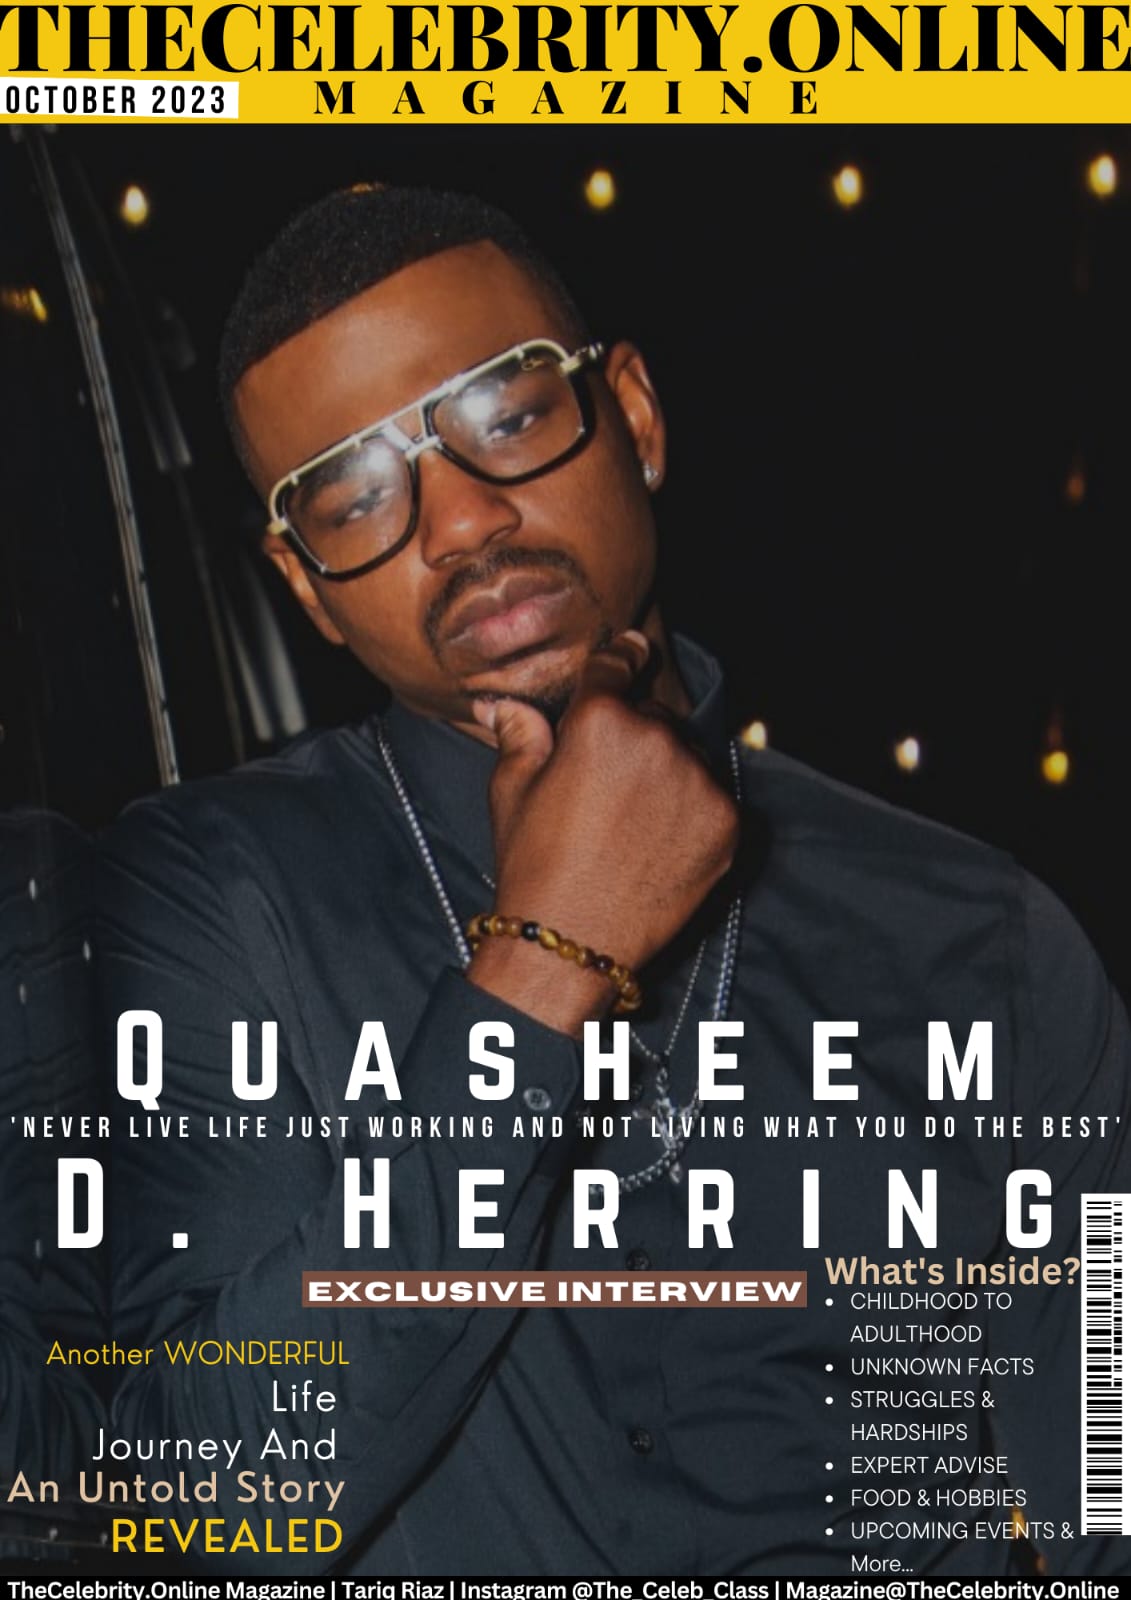 Quasheem D. Herring Exclusive Interview – ‘Never Live Life Just Working And Not Living What You Do The Best’